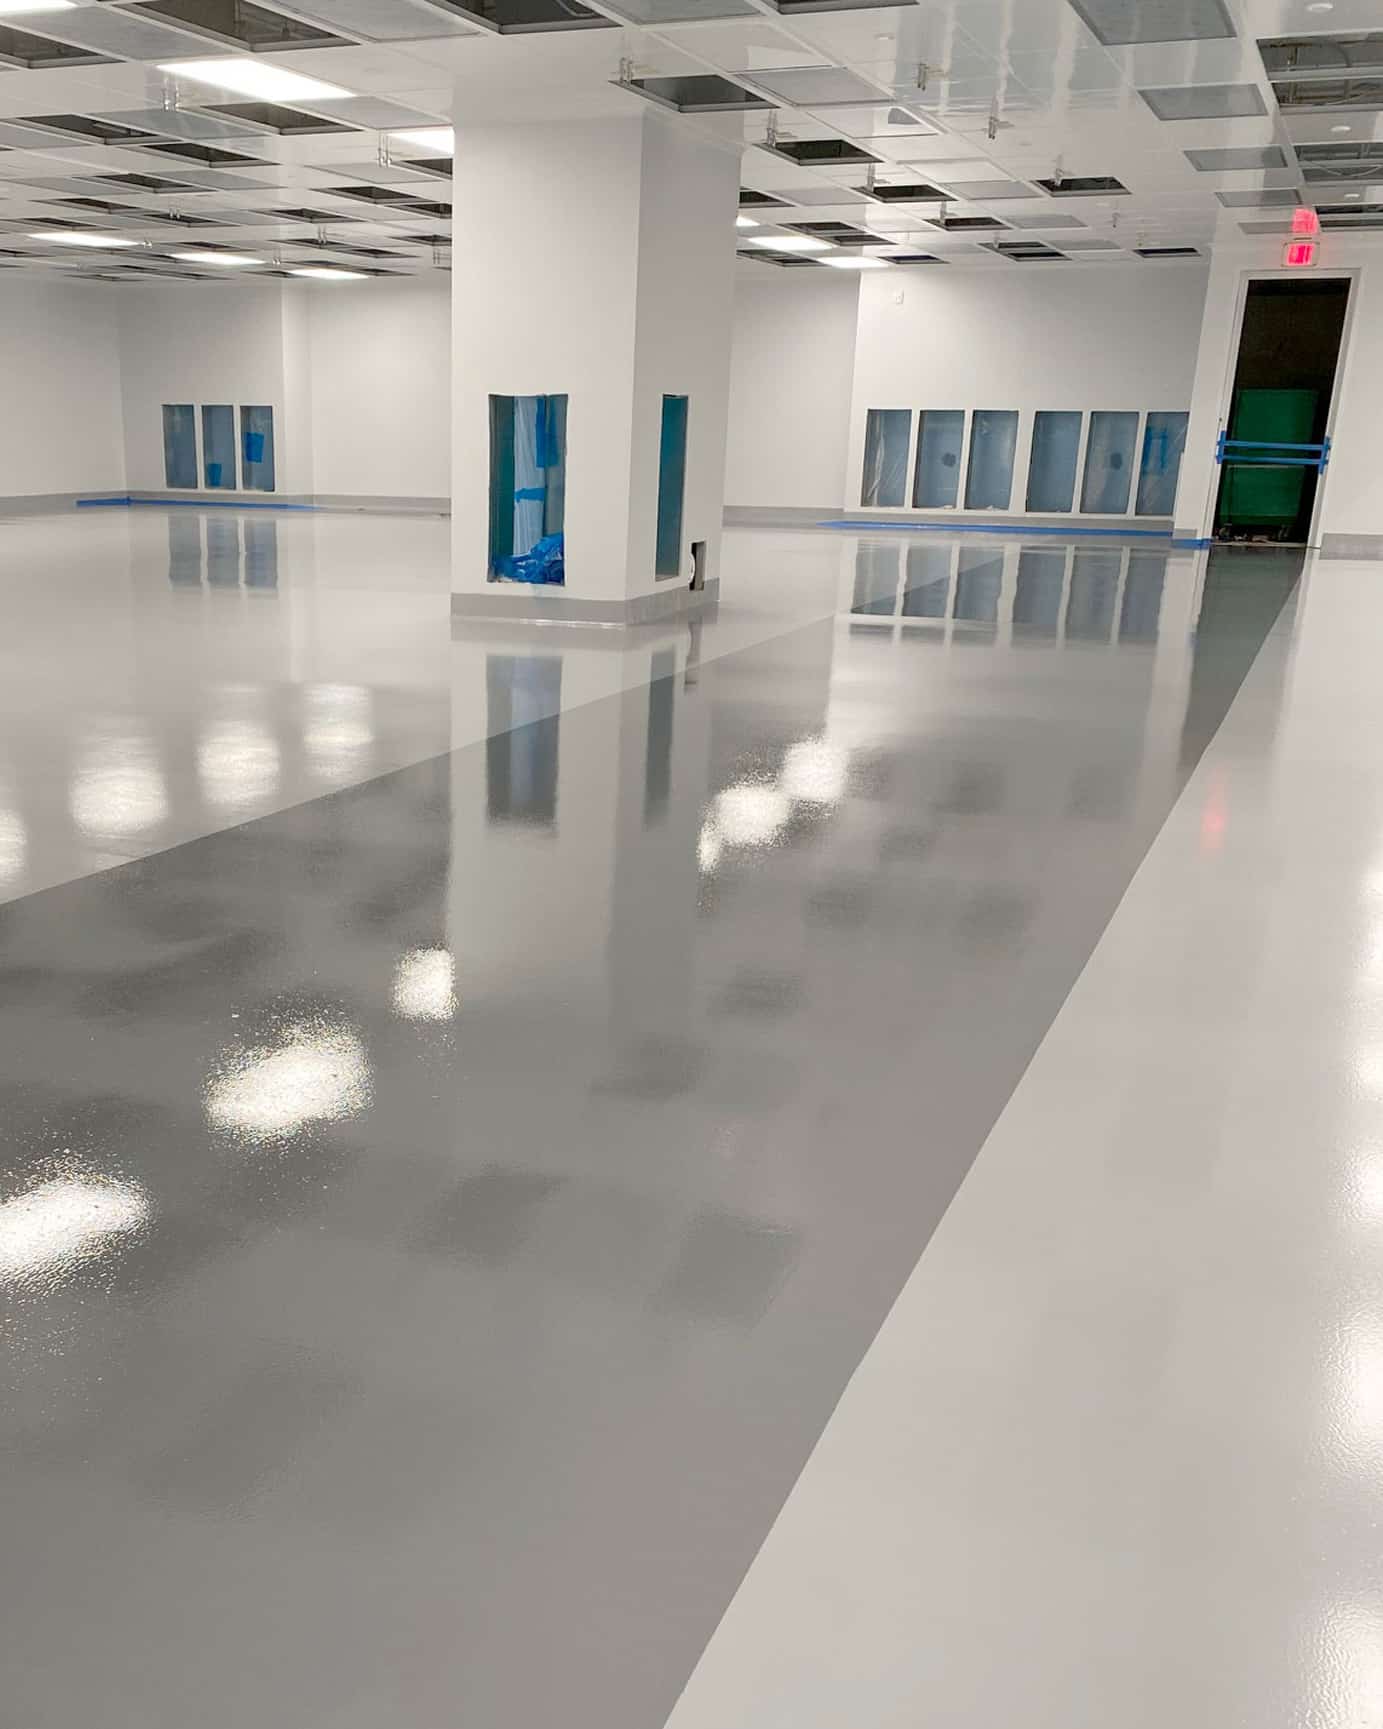 Polished concrete in office space. Everlast Industrial Flooring, Connecticut